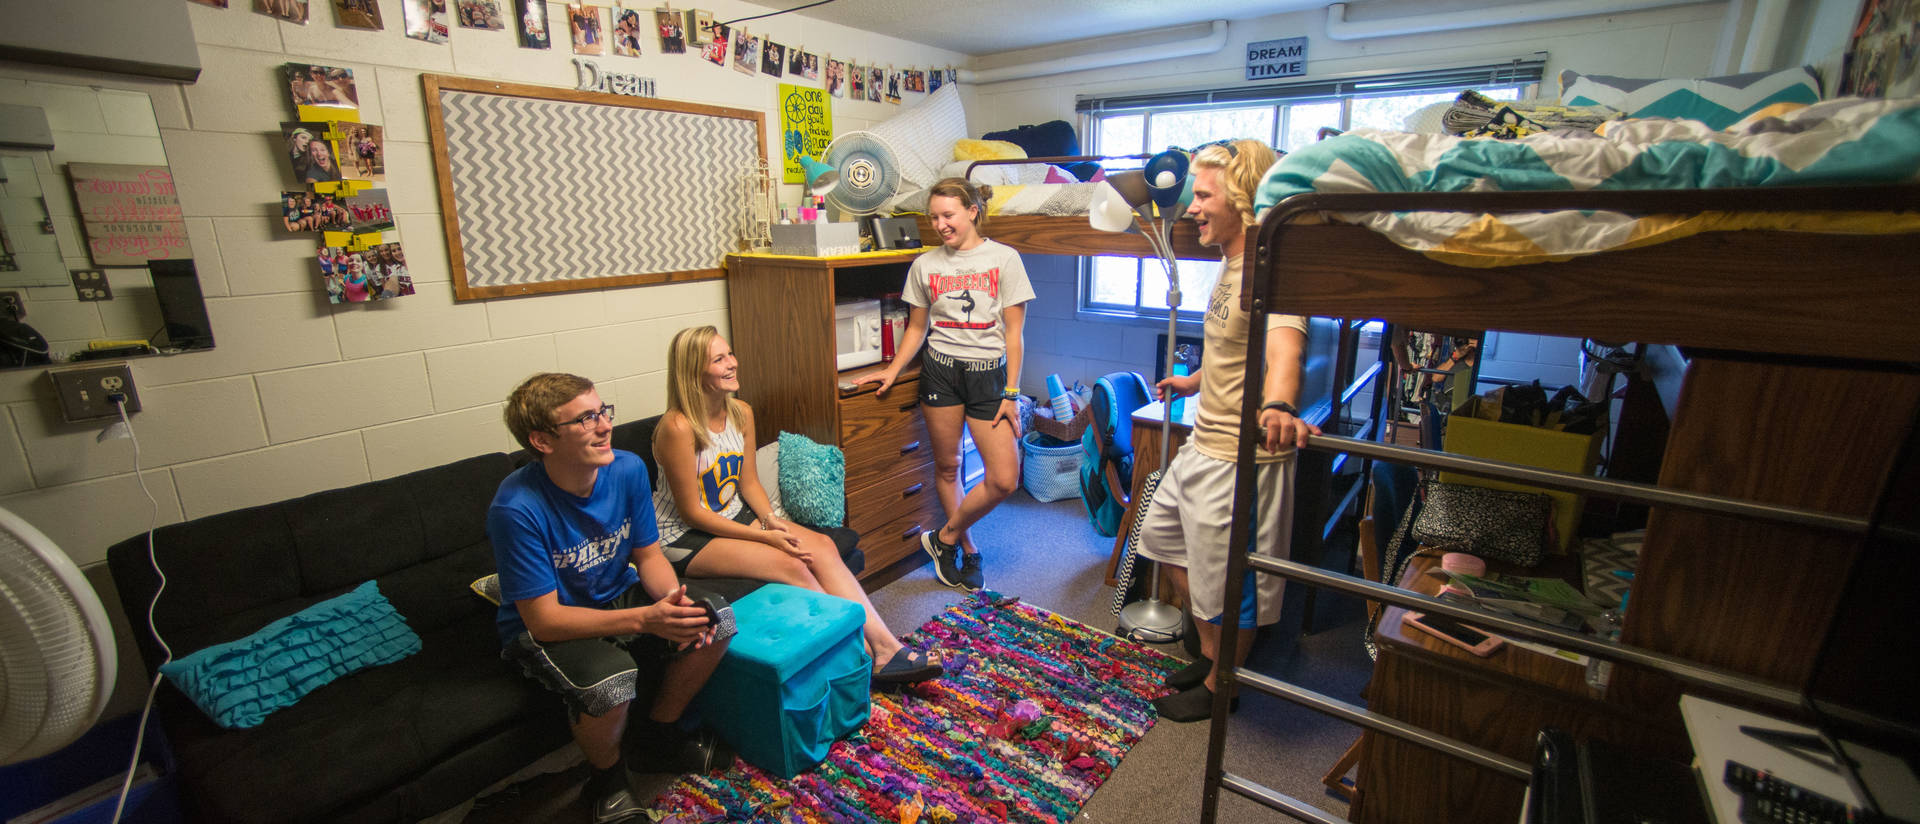 Four UWEC students hanging out in their dorm room